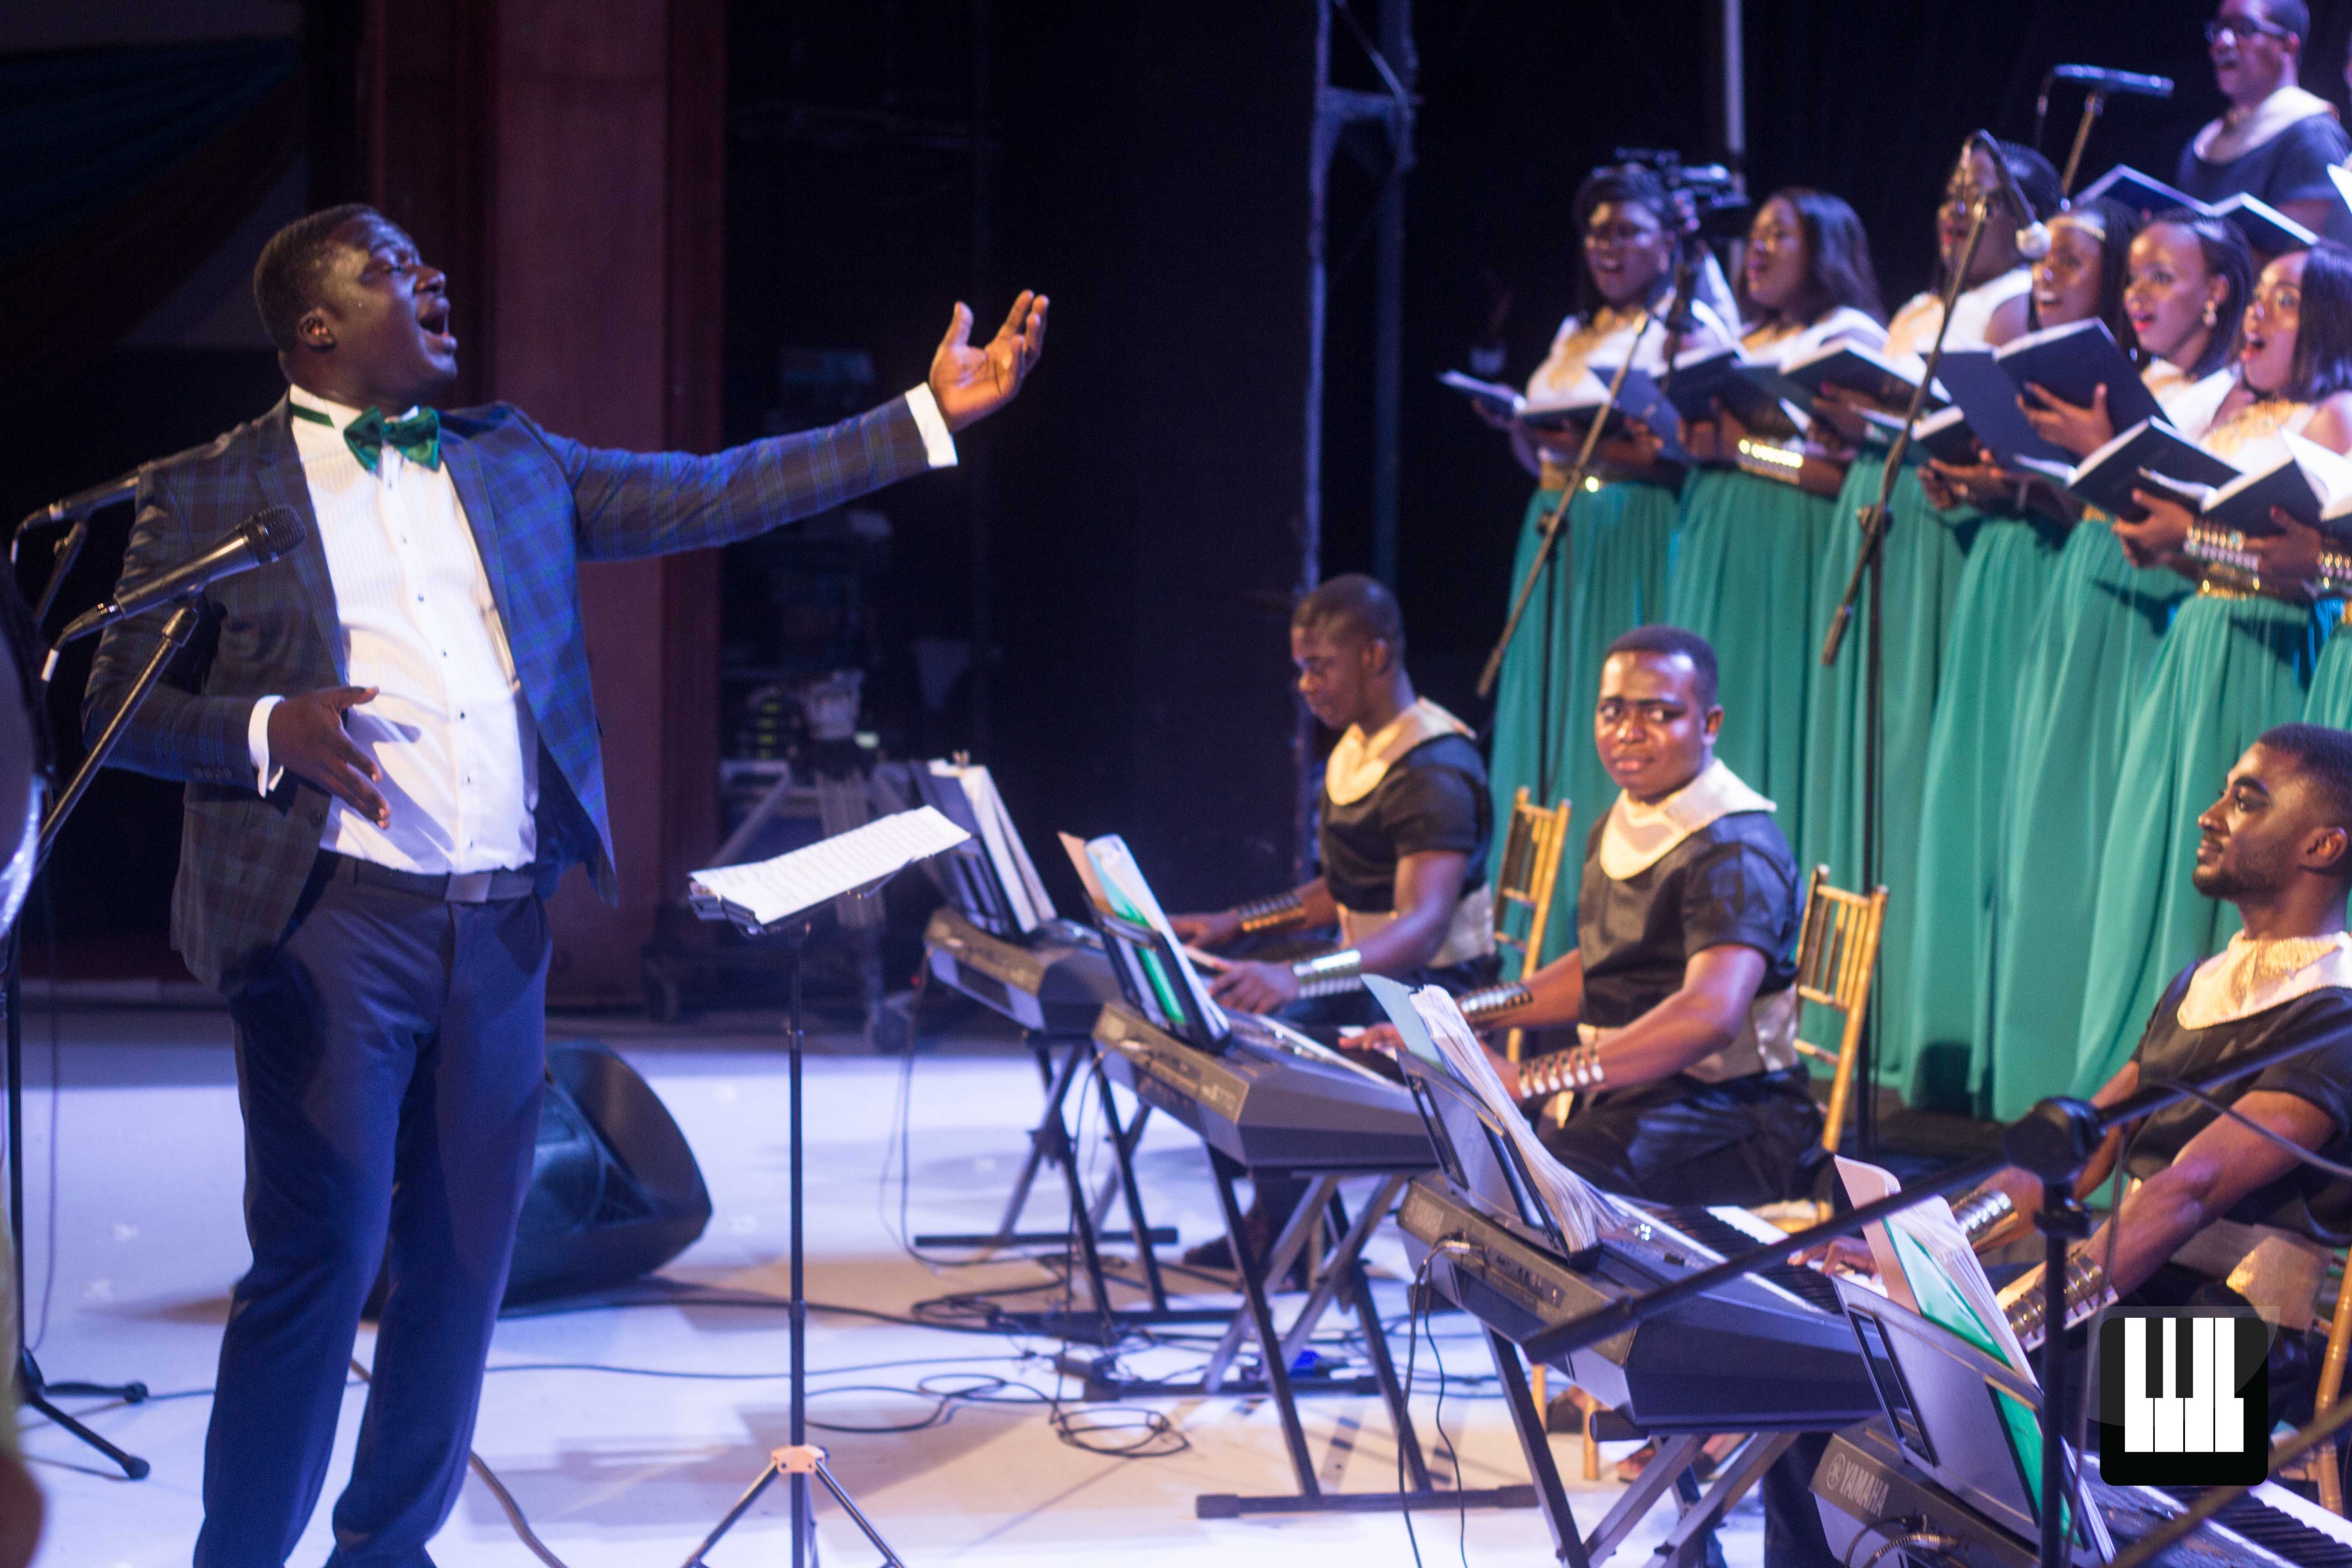 Joseph and His Brethren James Varrick Armaah led Harmonious Chorale in a historic performance of Handel's Joseph and his Brethren in Accra. Choral Music Ghana takes a look at the performance and what it means for Ghanaian music.